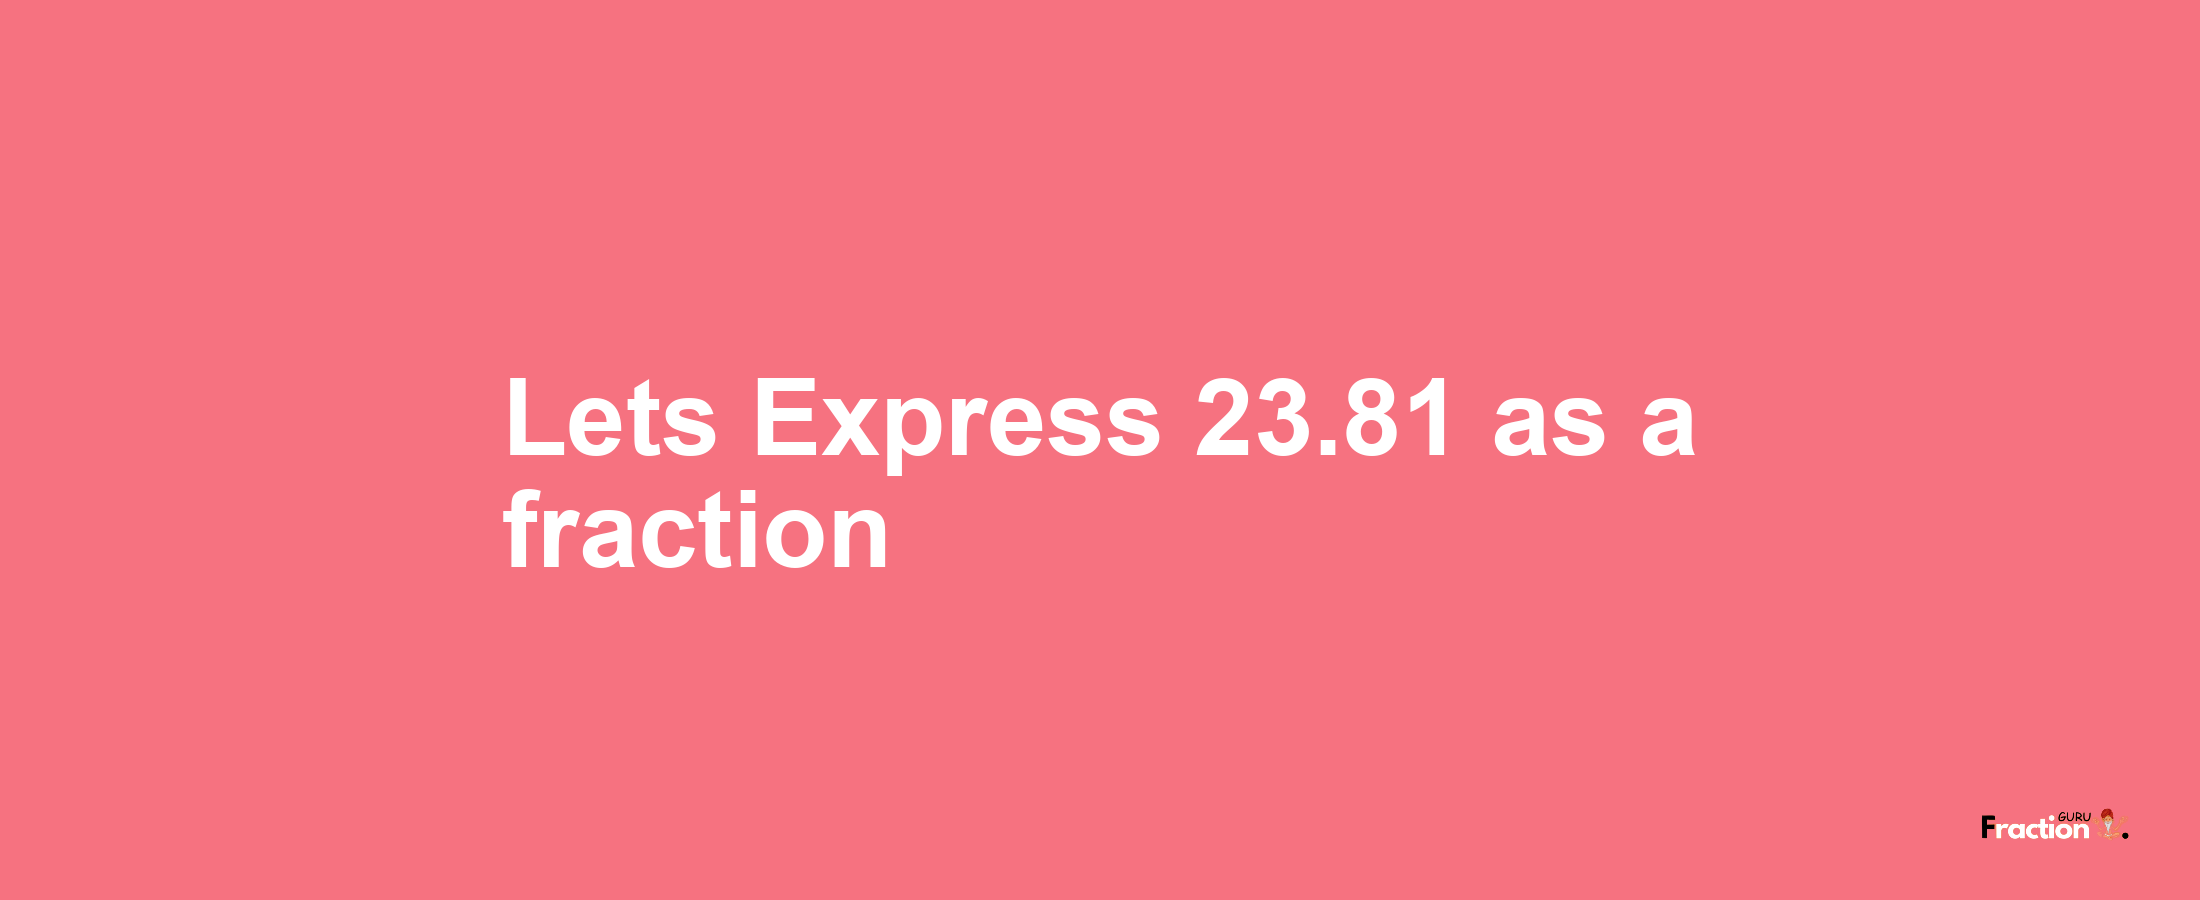 Lets Express 23.81 as afraction